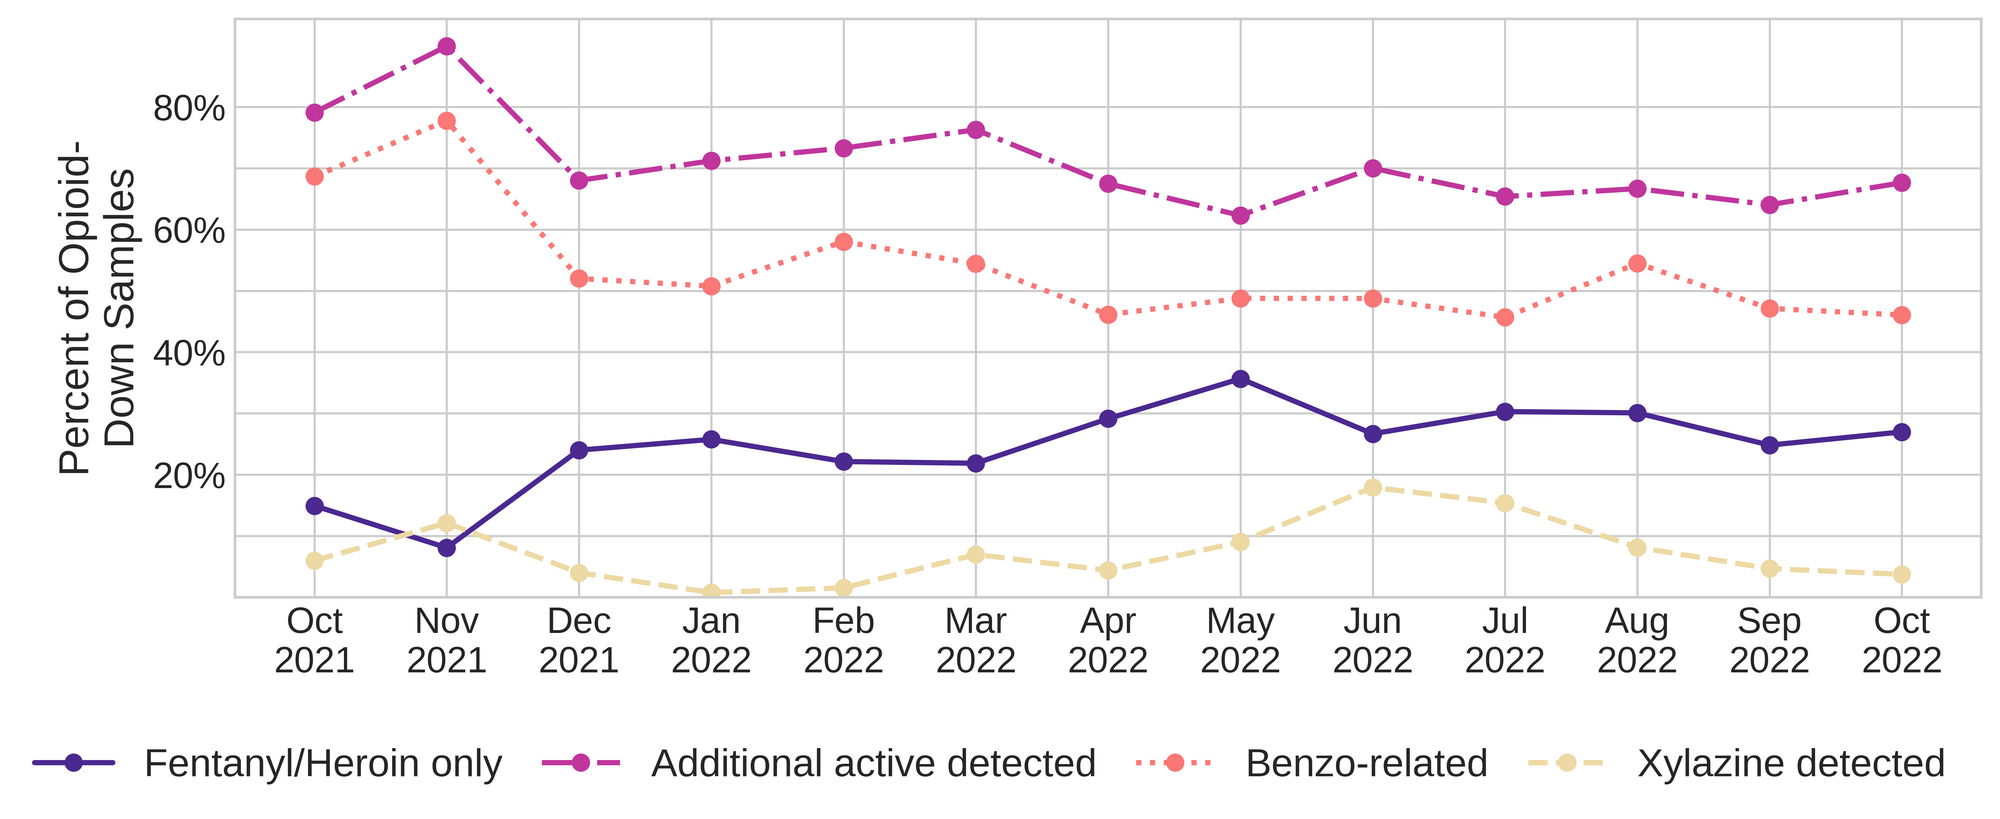 Figure 3. The percentage of expected opioid-down samples checked between October 2021 and October 2022 that only contained fentanyl/heroin actives (dark purple), opioid-down samples with an additional active detected (magenta), opioid-down samples that contained a benzodiazepine-related drug salmon), and opioid-down samples that contained xylazine (yellow).